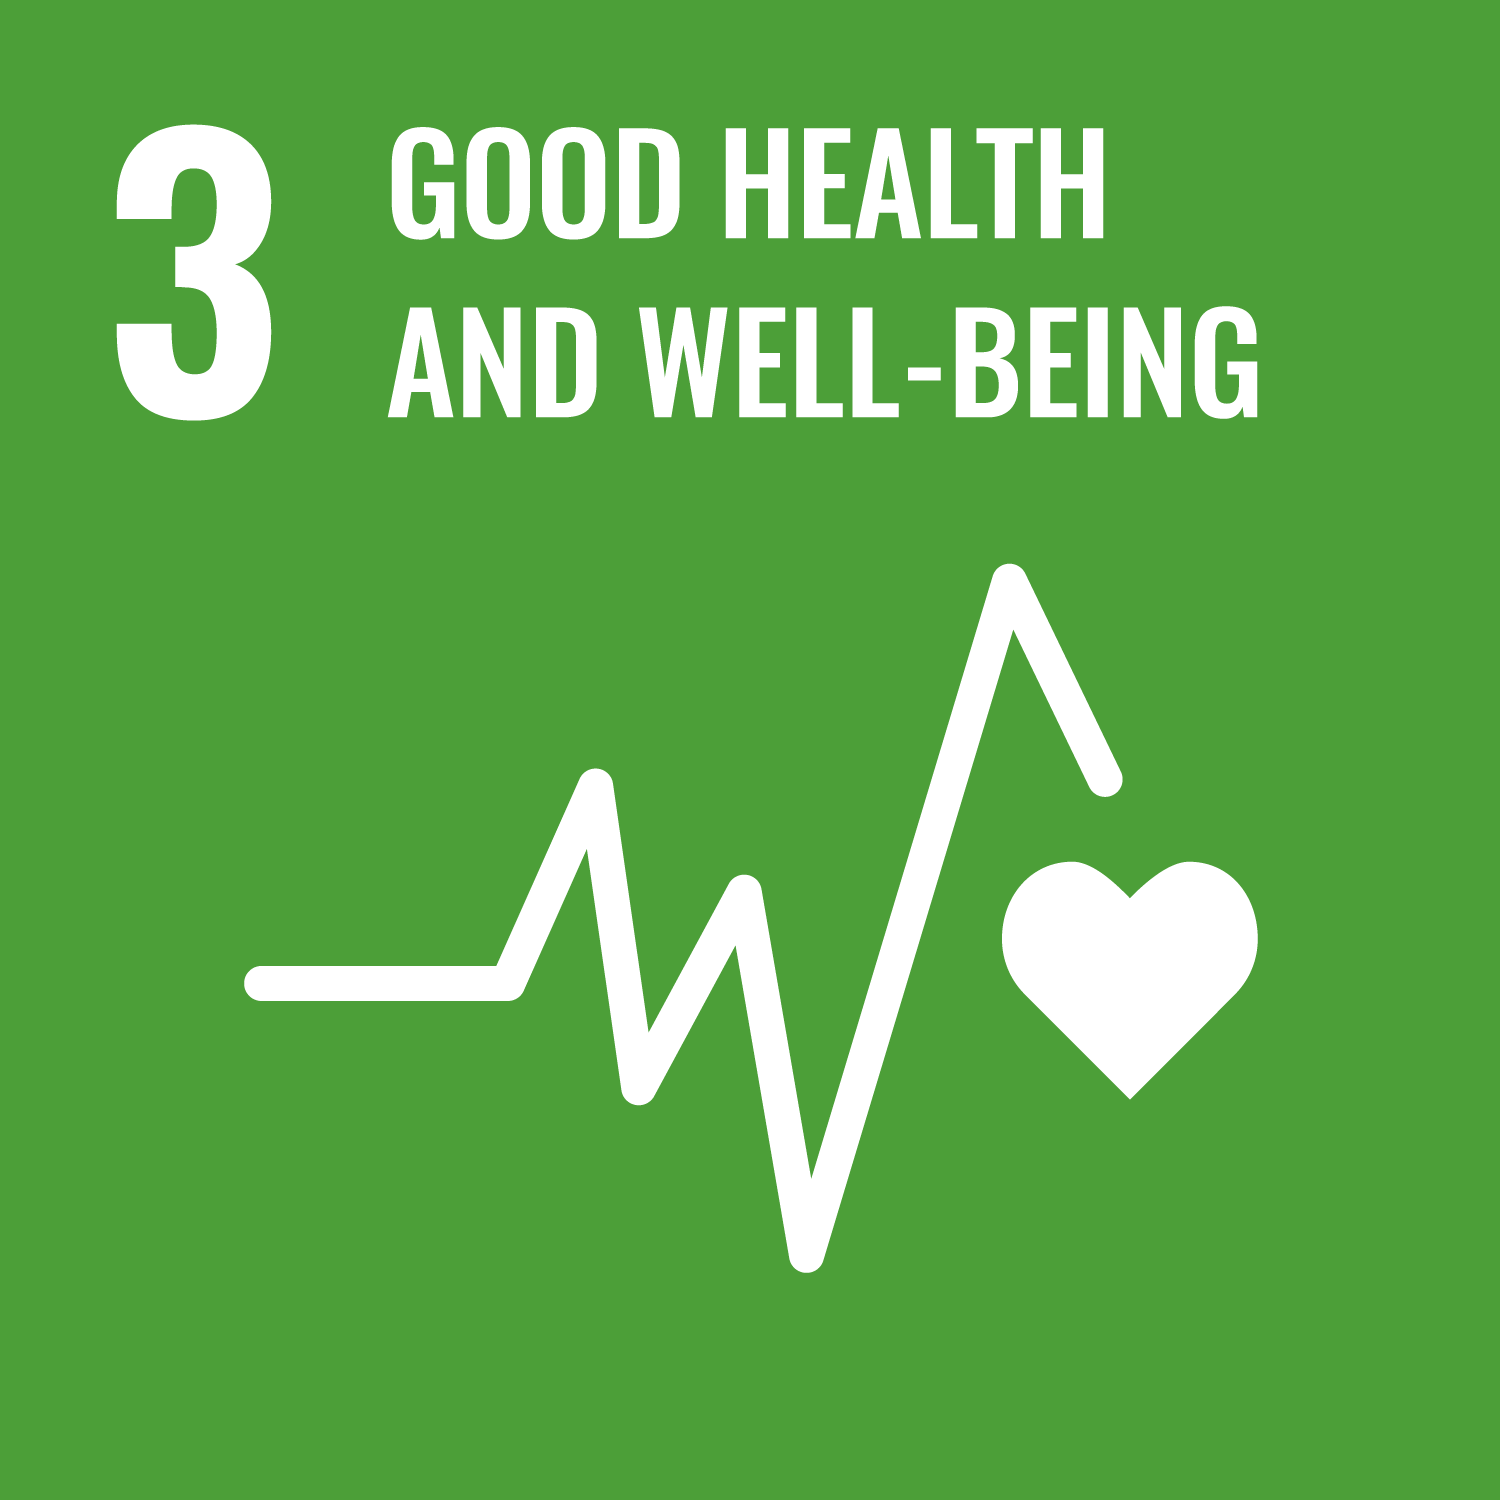 United Nation's 17 Sustainable Development Goals: Goal Number 3: Good Health and Well-Being